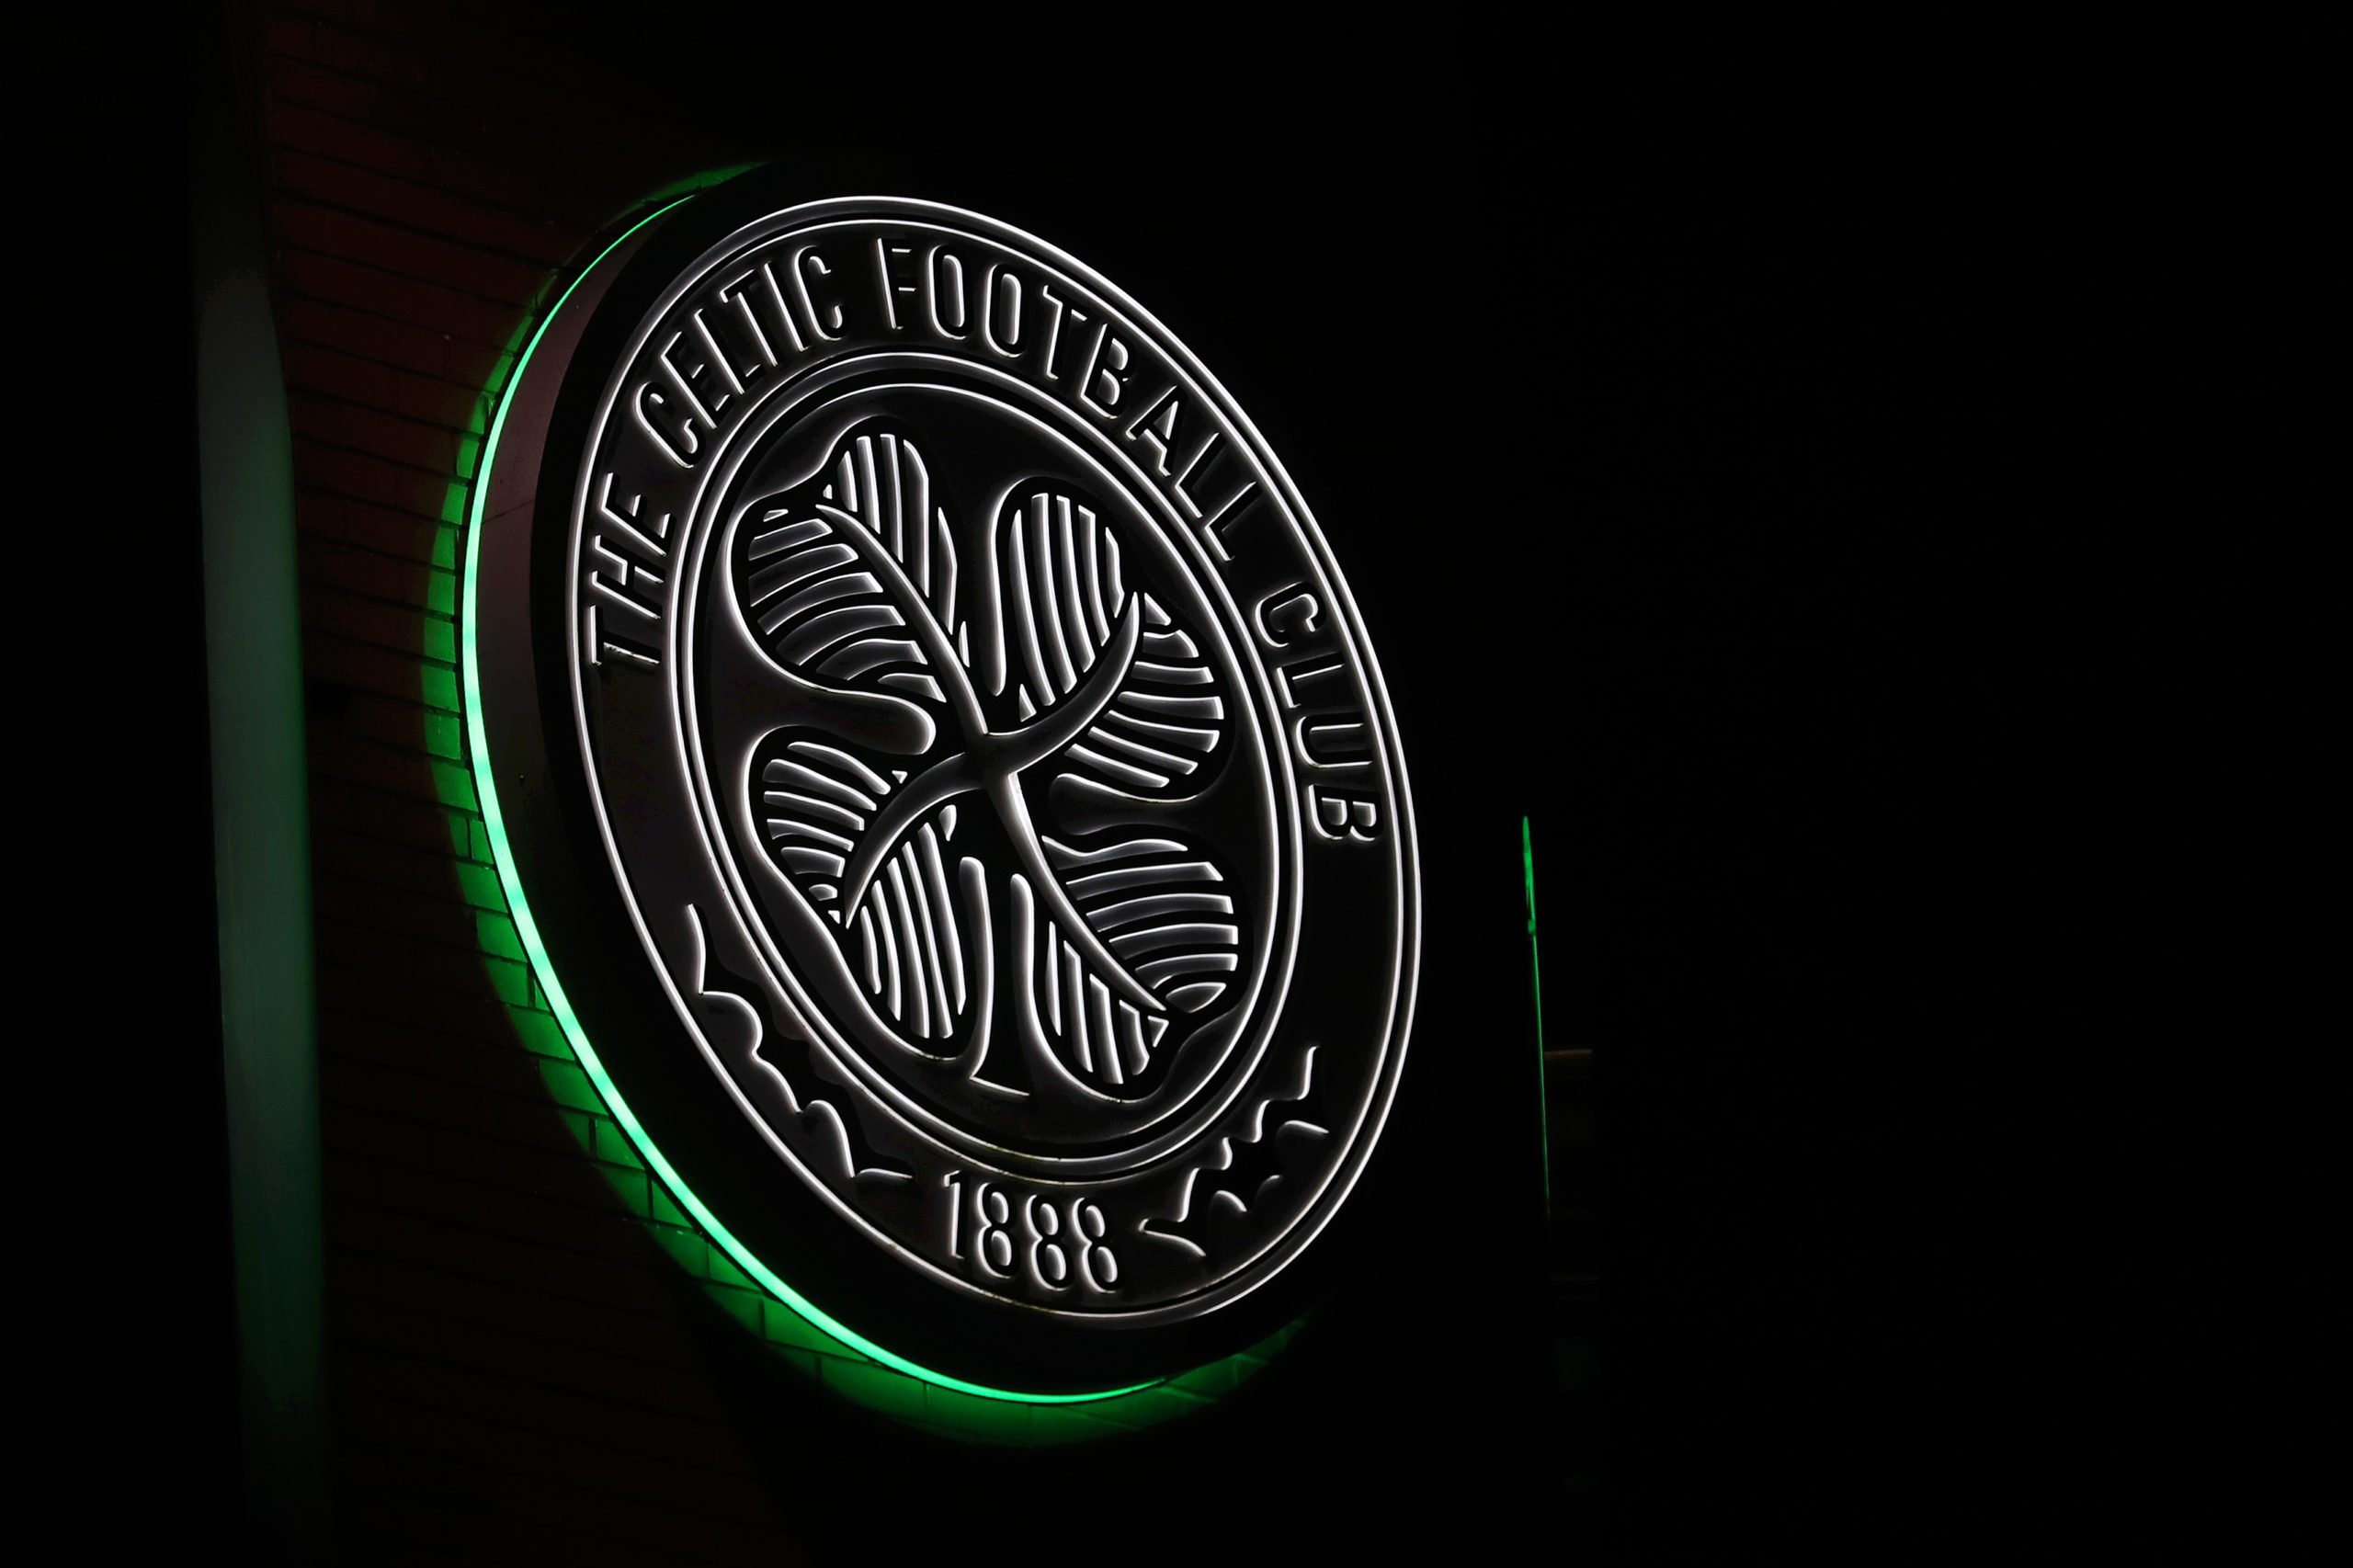 Finally, an apology out of someone at Celtic for this horror season